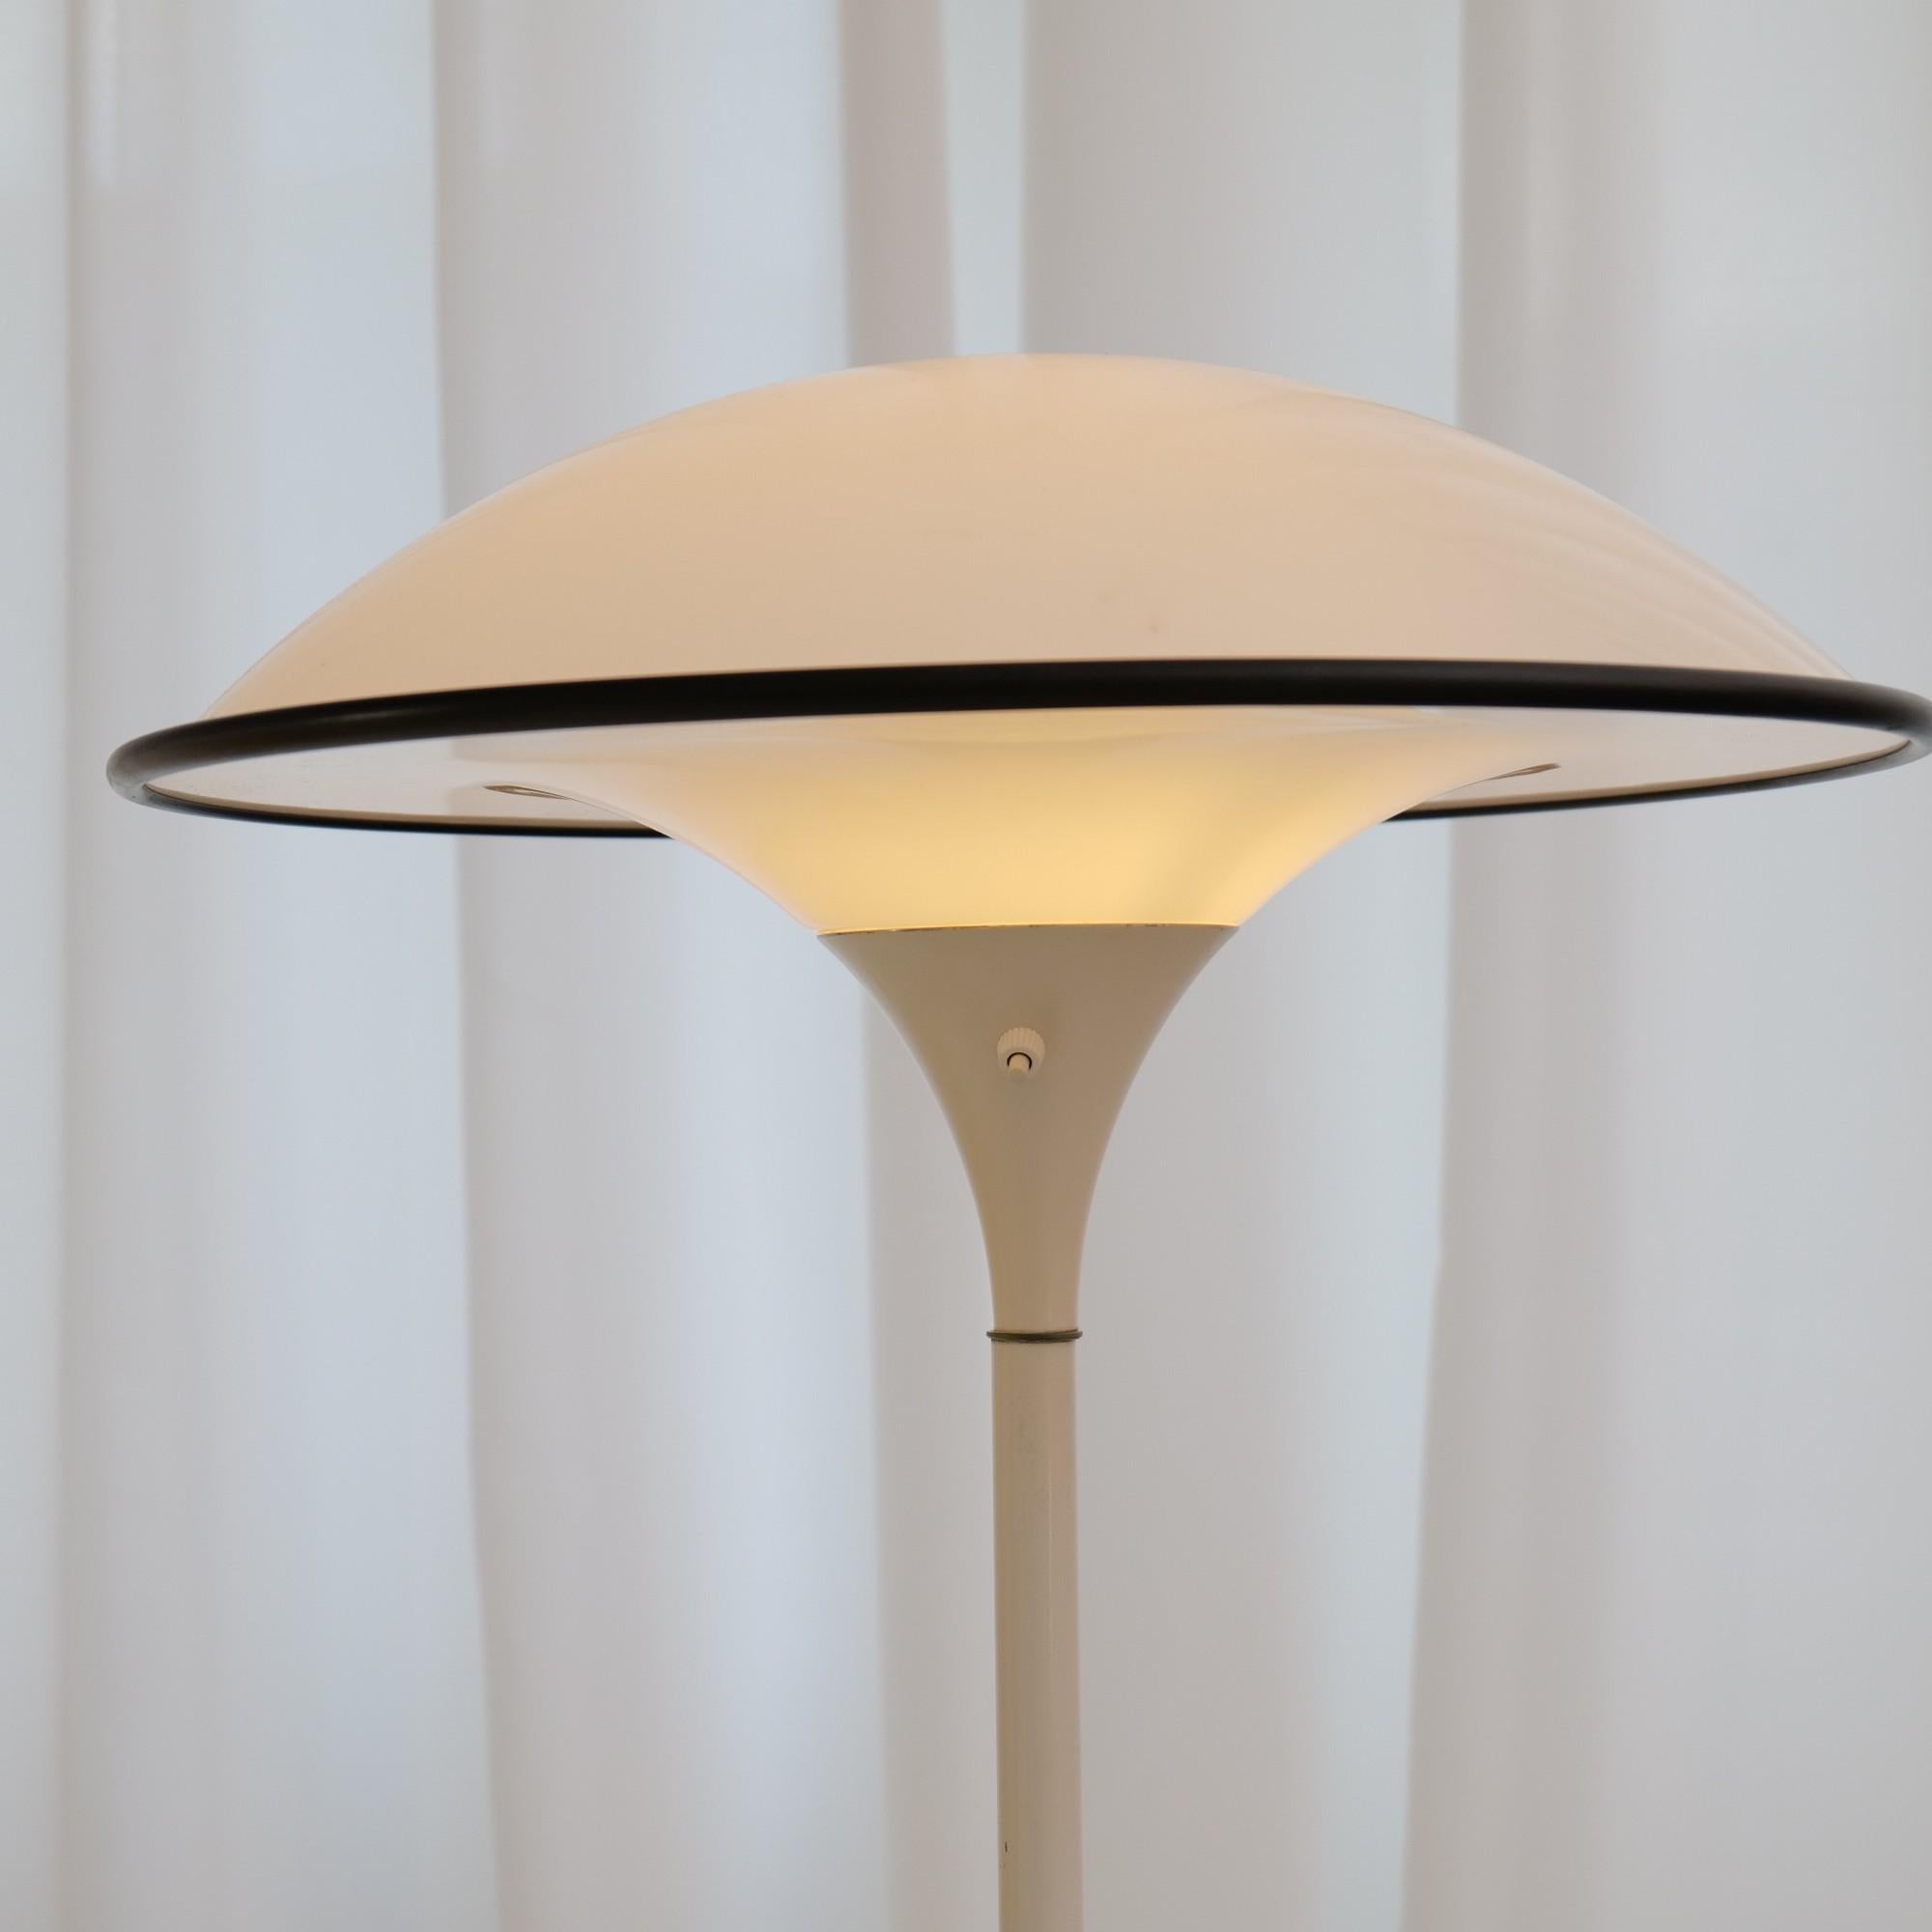 Late 20th Century Space Age Floor Lamp by Preben Jacobsen for Fog & Morup, 1980s For Sale